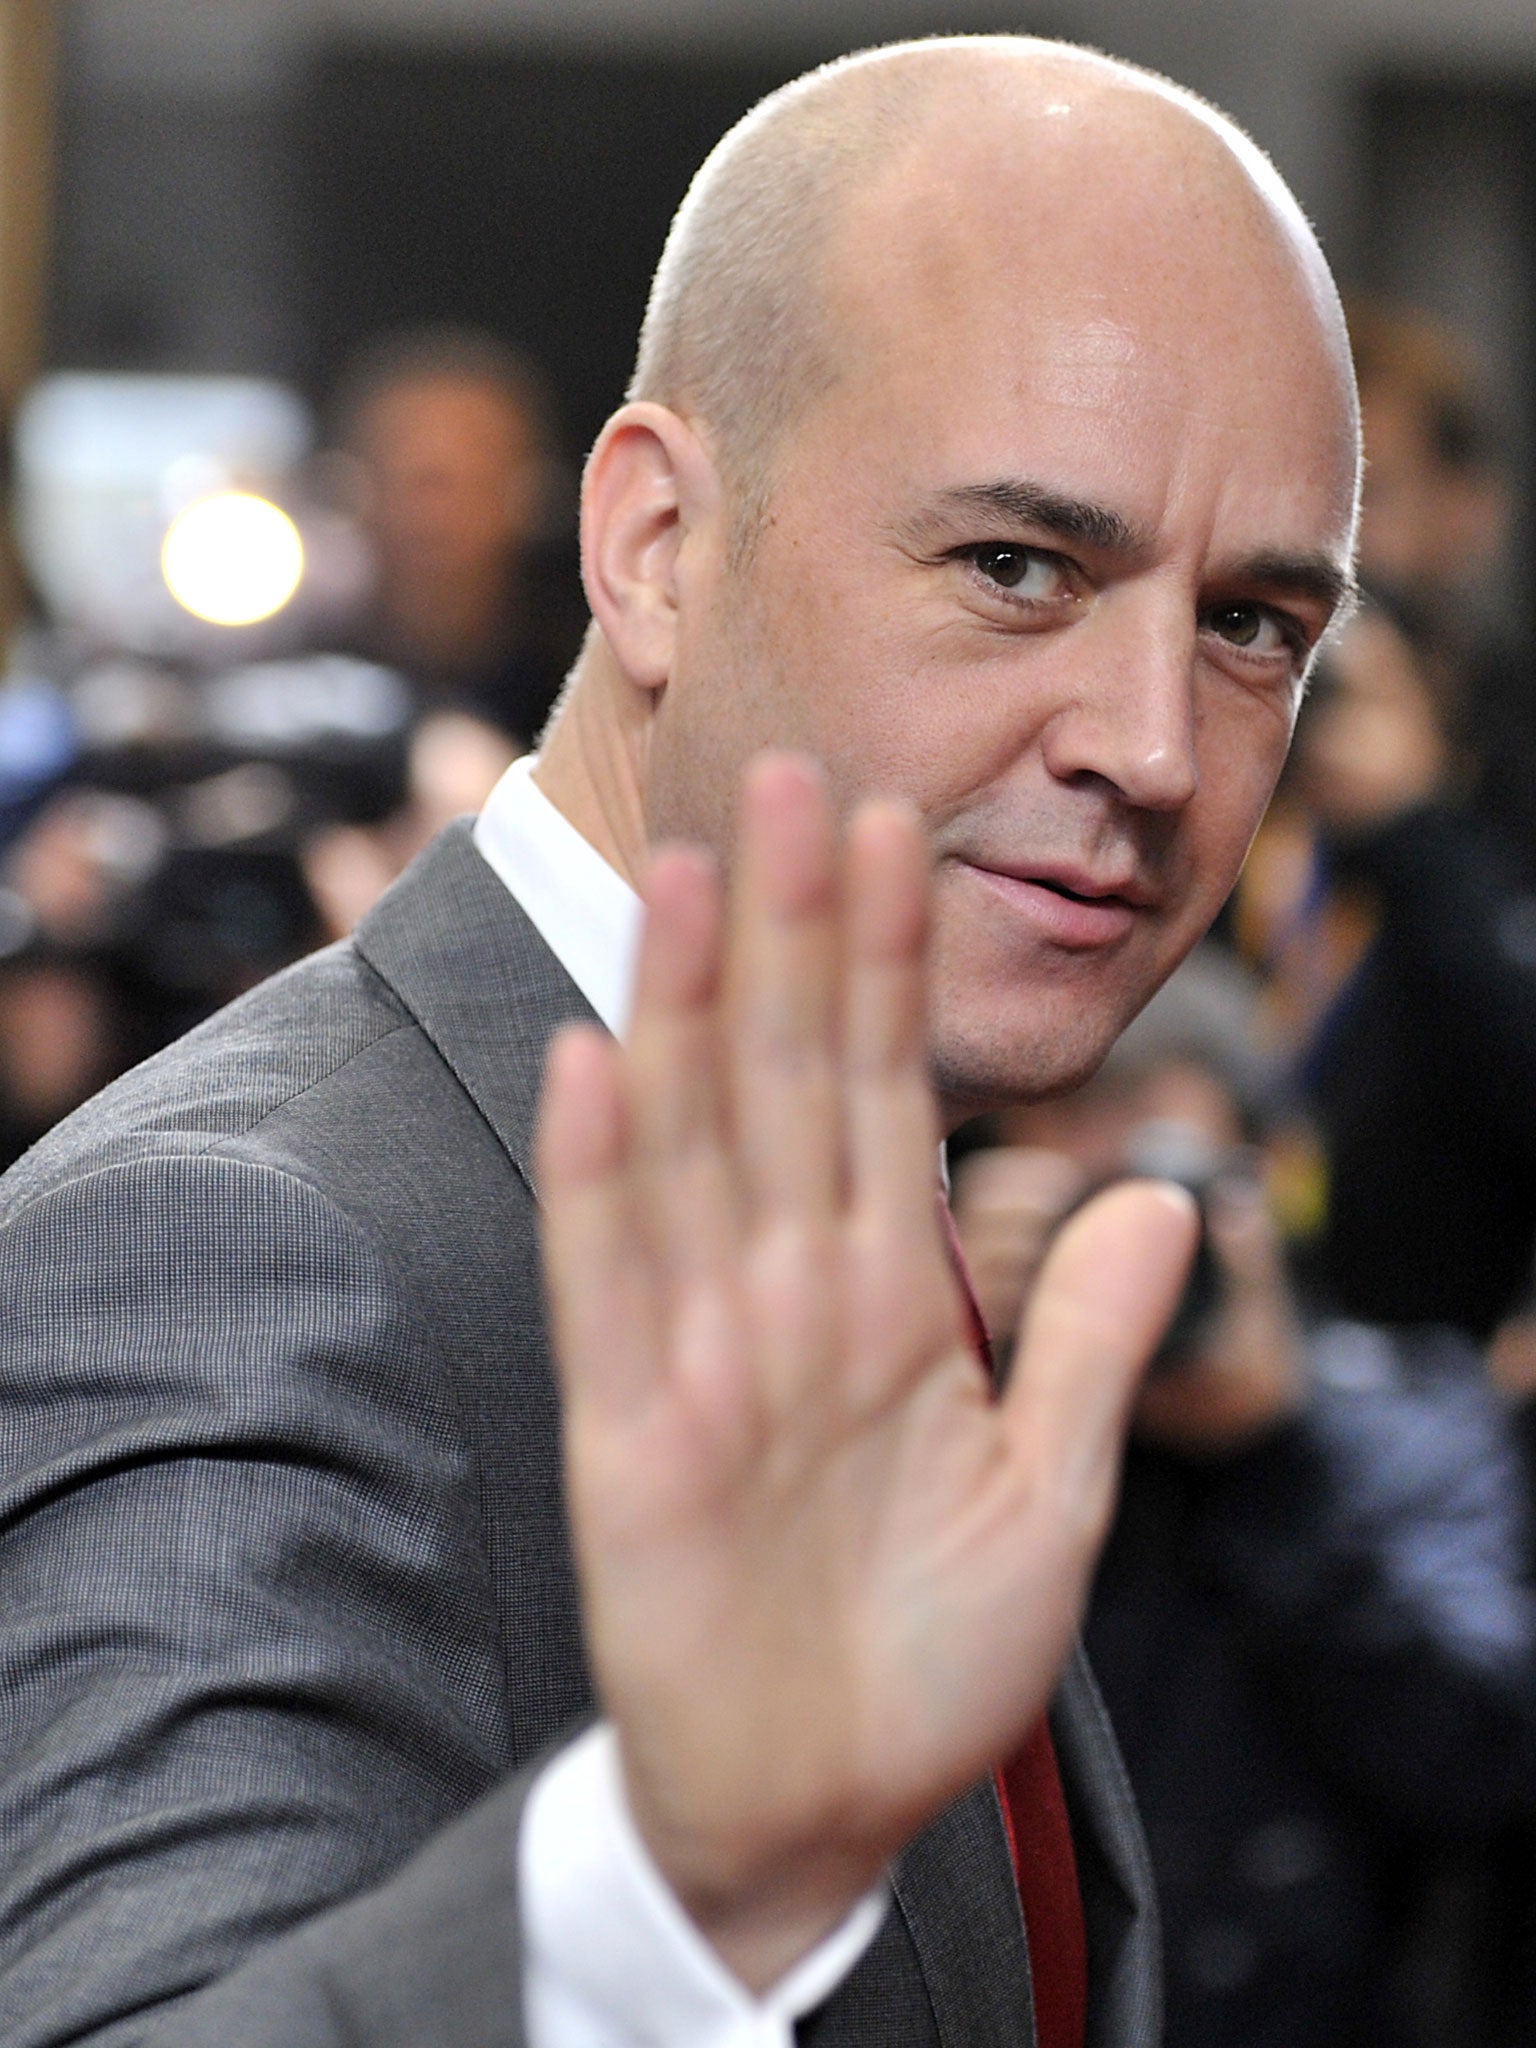 Fredrik Reinfeldt says he wants a mandatory prison sentence for buying sex from minors